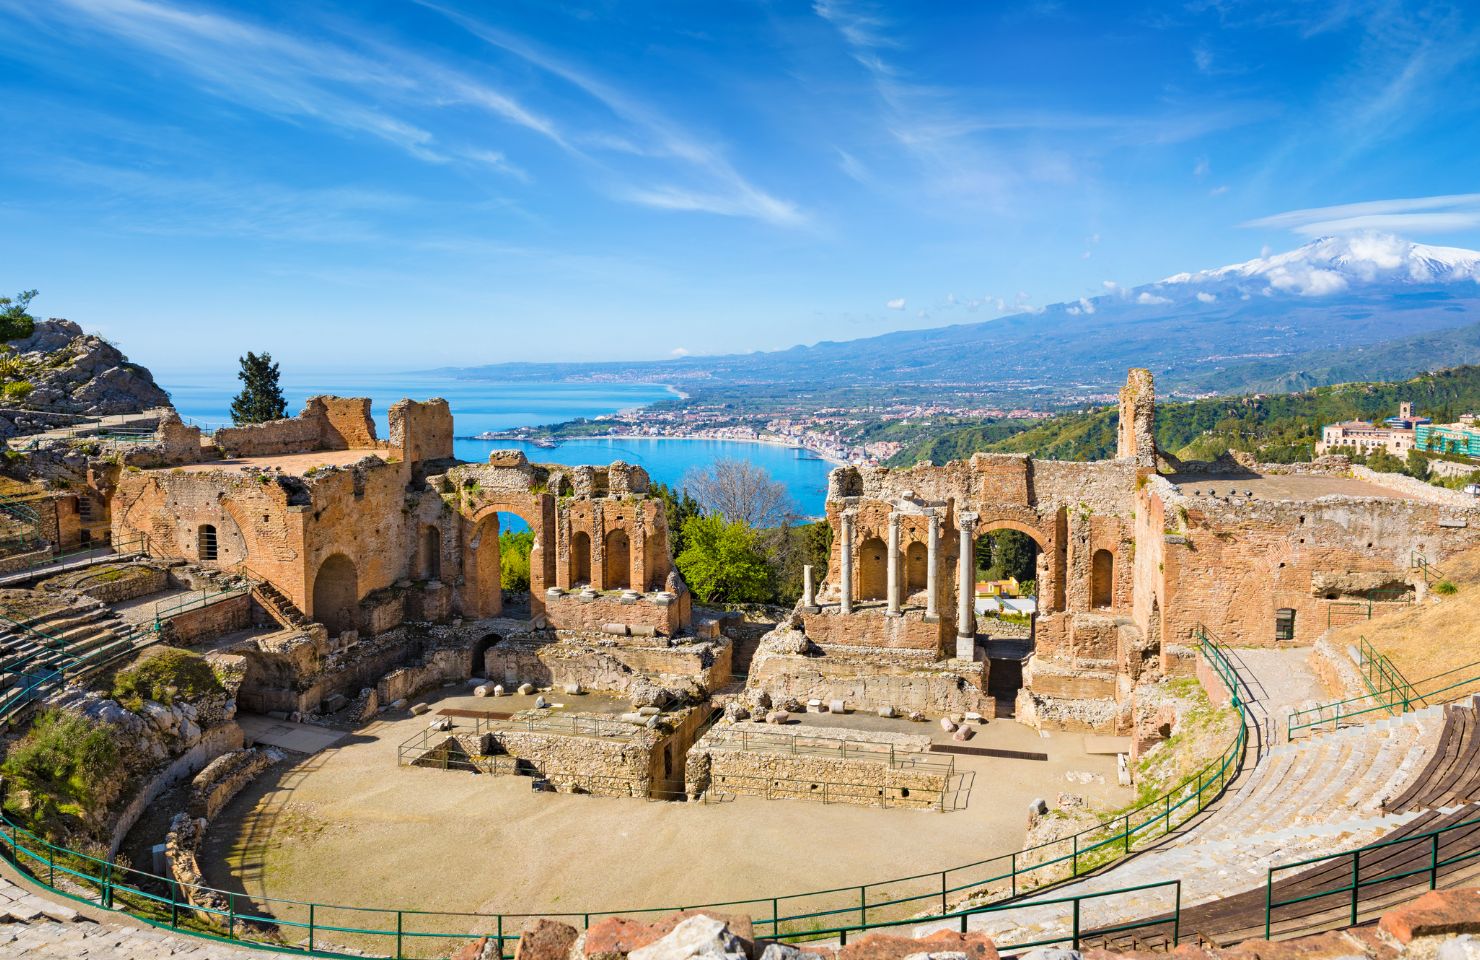 sicily, the most instagrammable place in italy